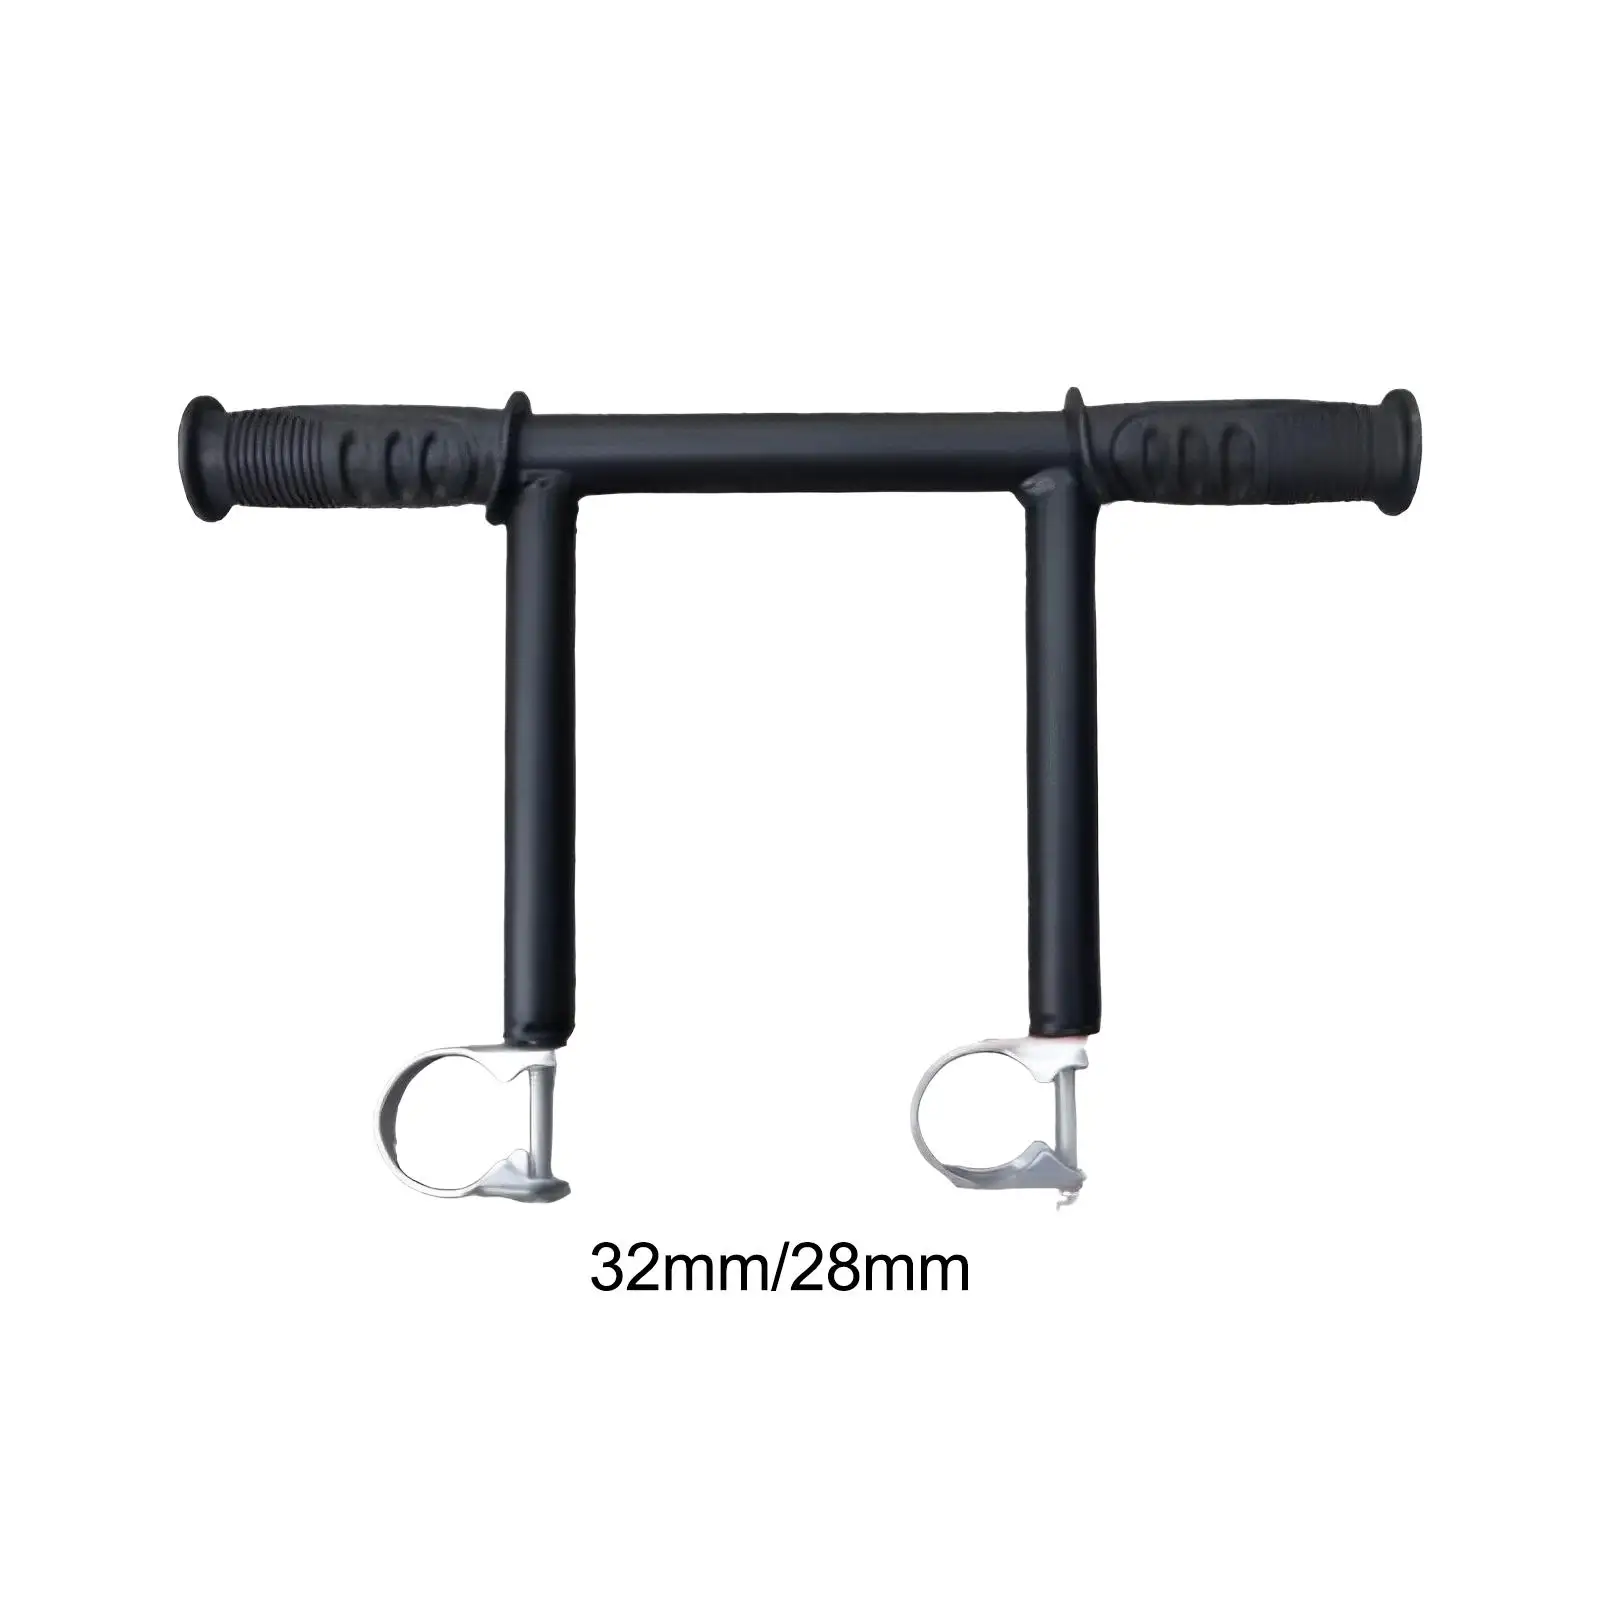 Metal Easy to Install Durable Sturdy Stroller Handle Extender for Pram Trolley Baby Stroller Carriage Pushchair Accessory